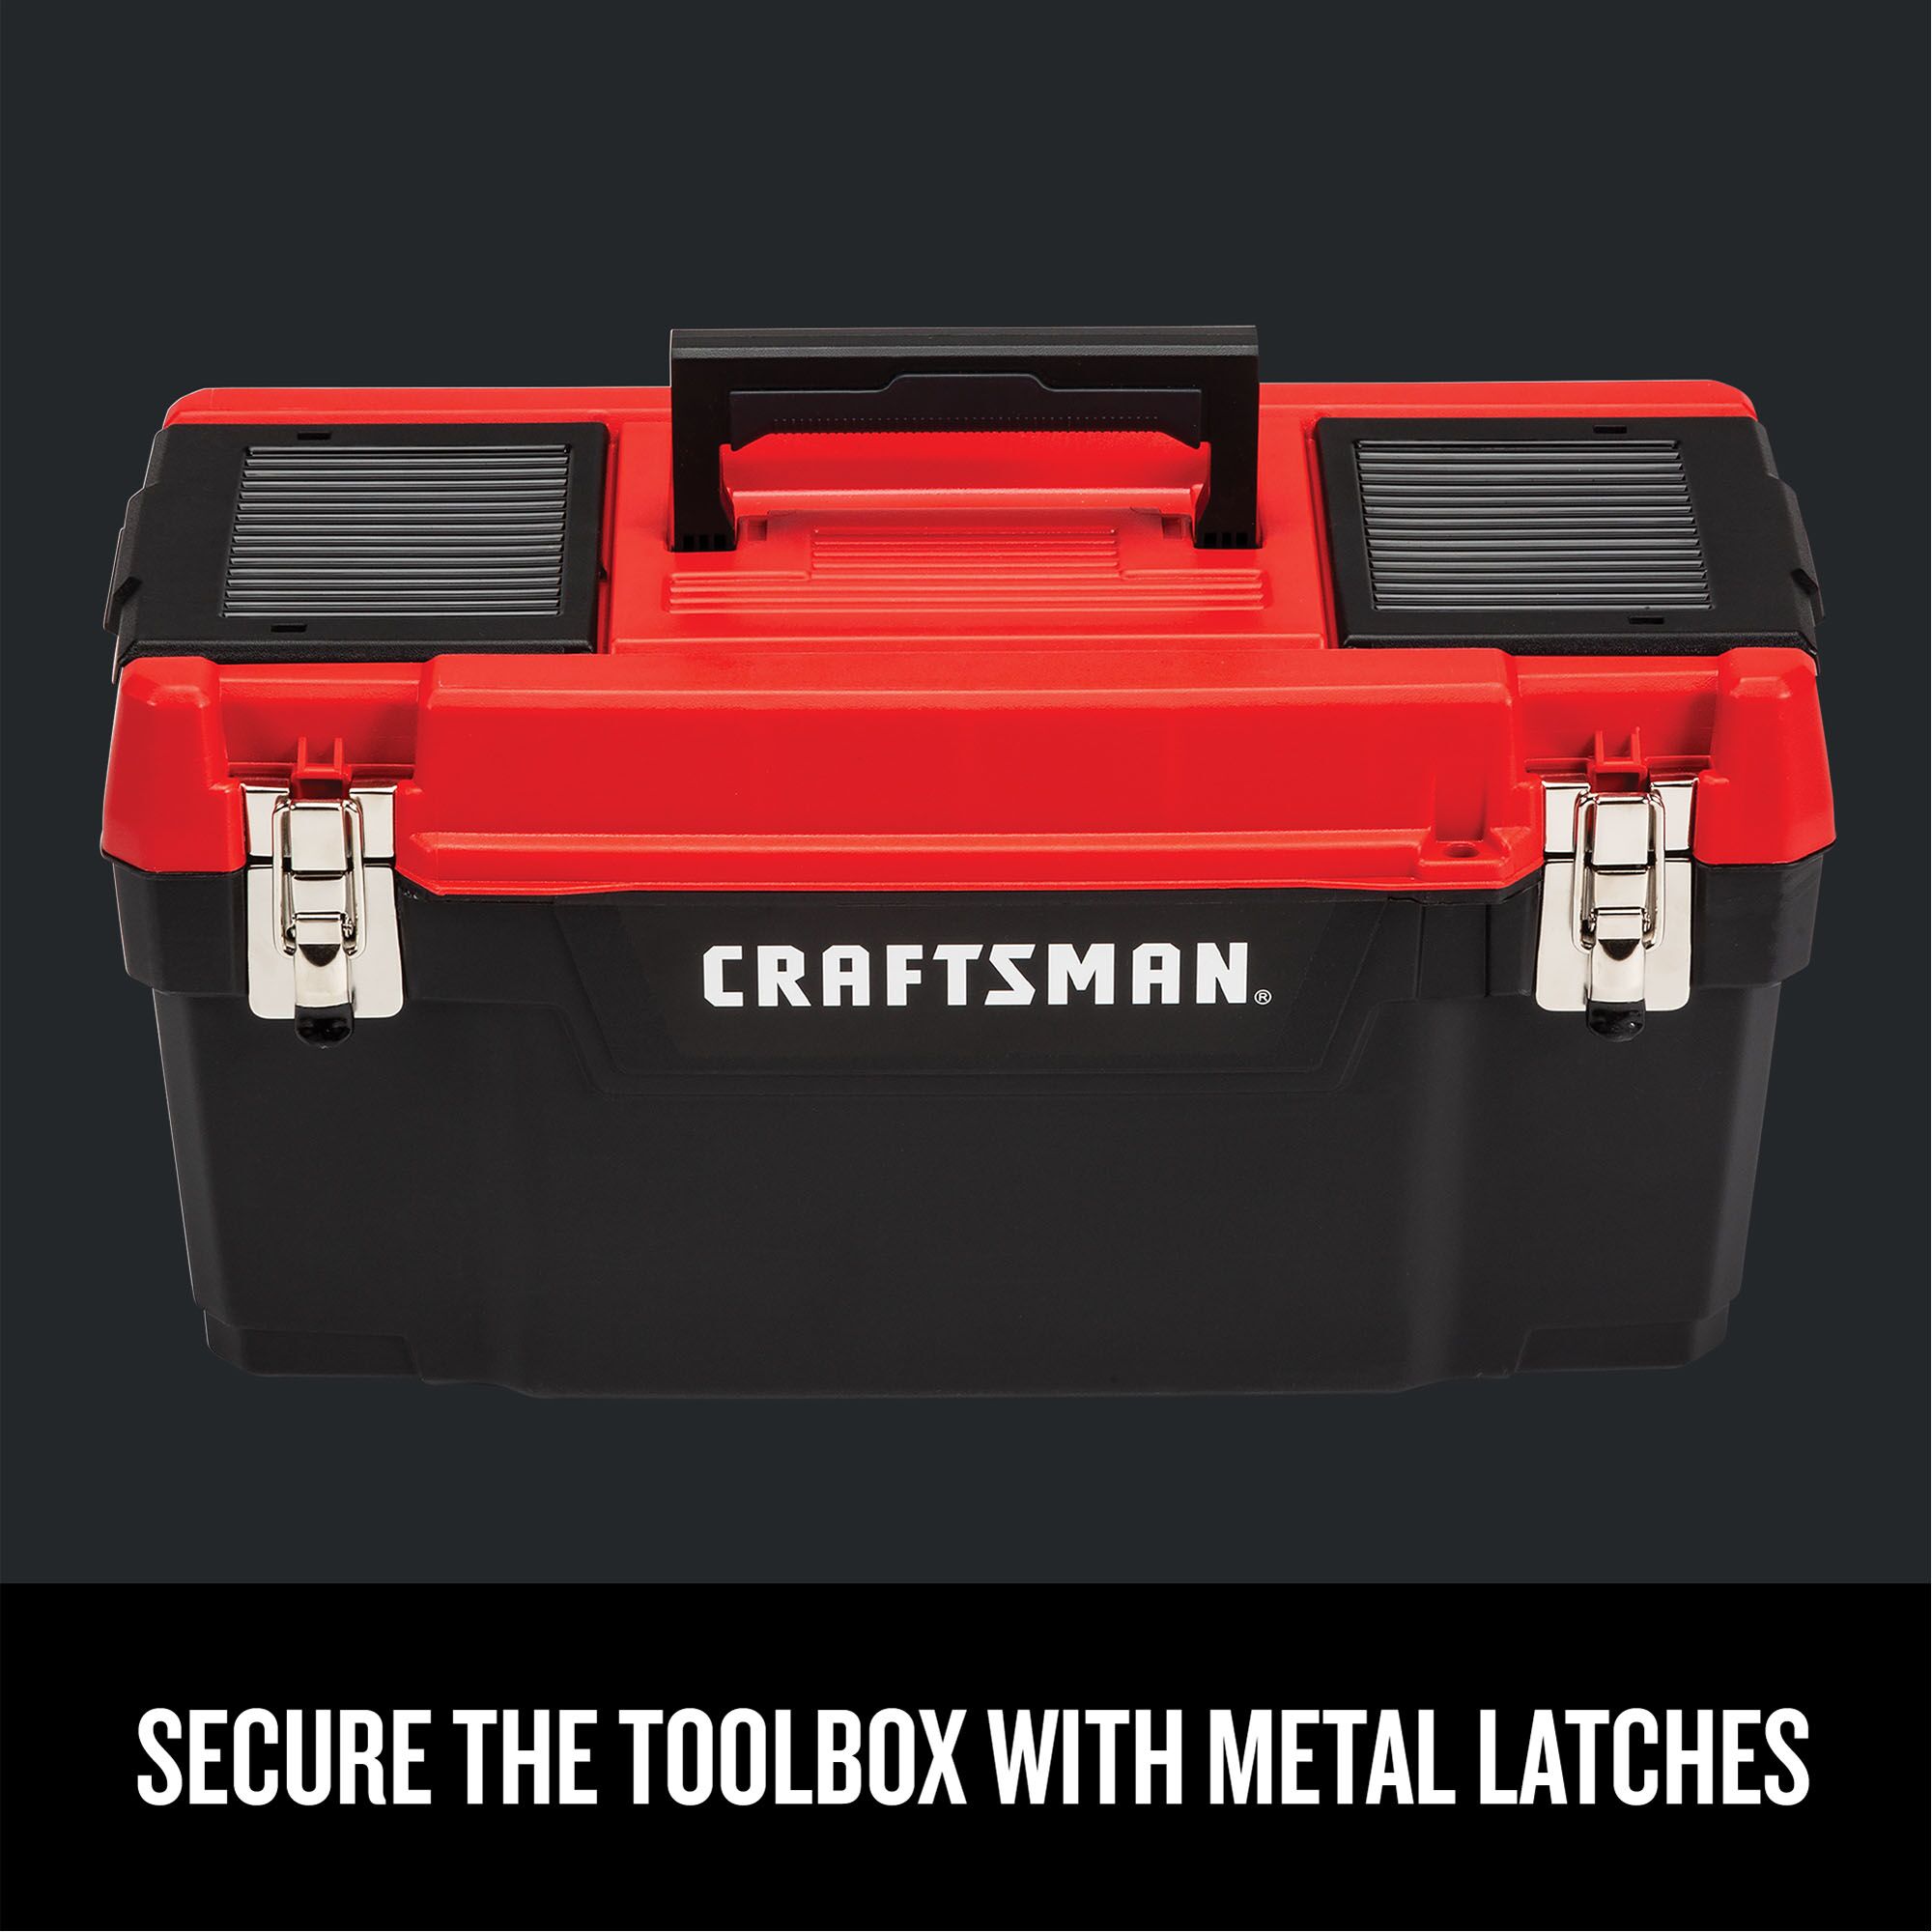 Craftsman mini Plastic Tool Boxes are Perfected for Small Tool and